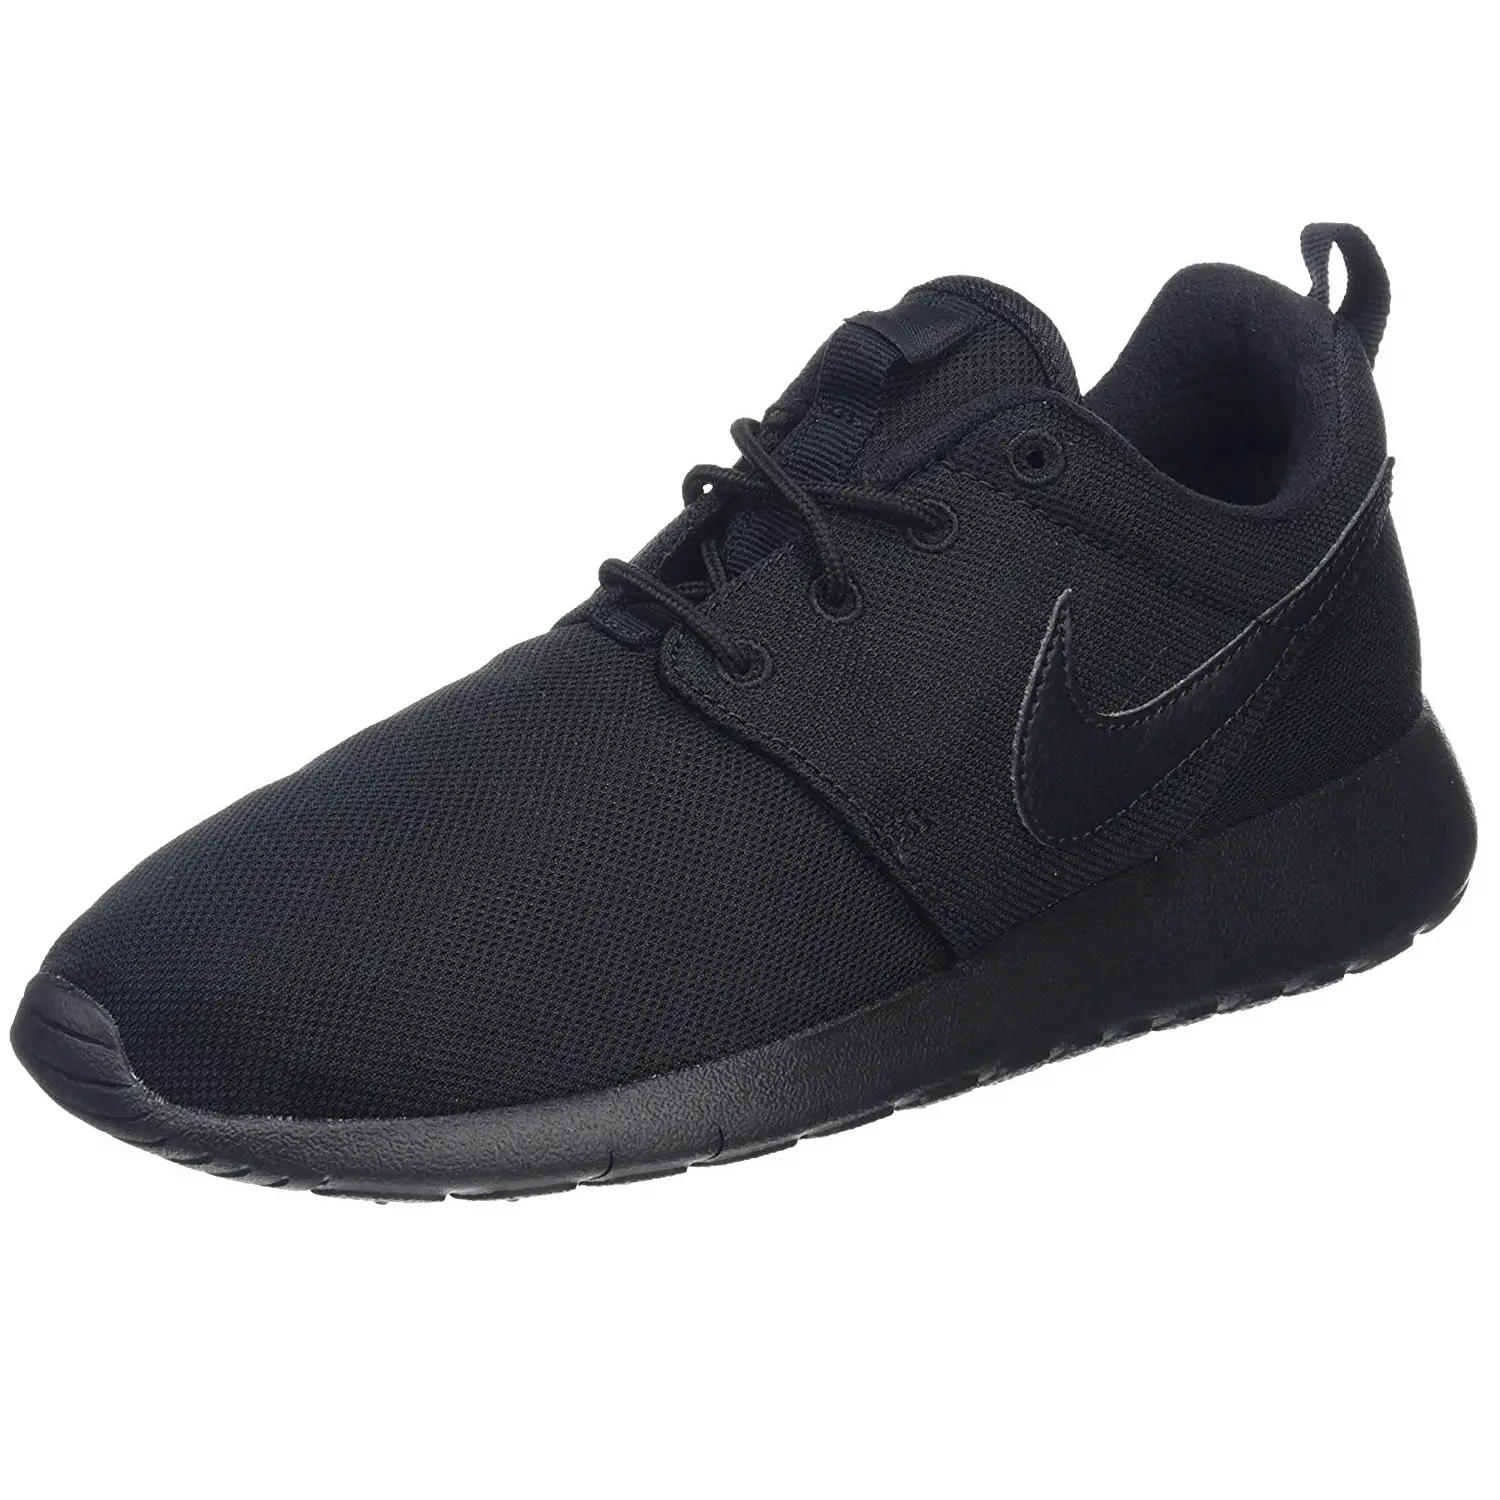 are nike roshe one running shoes